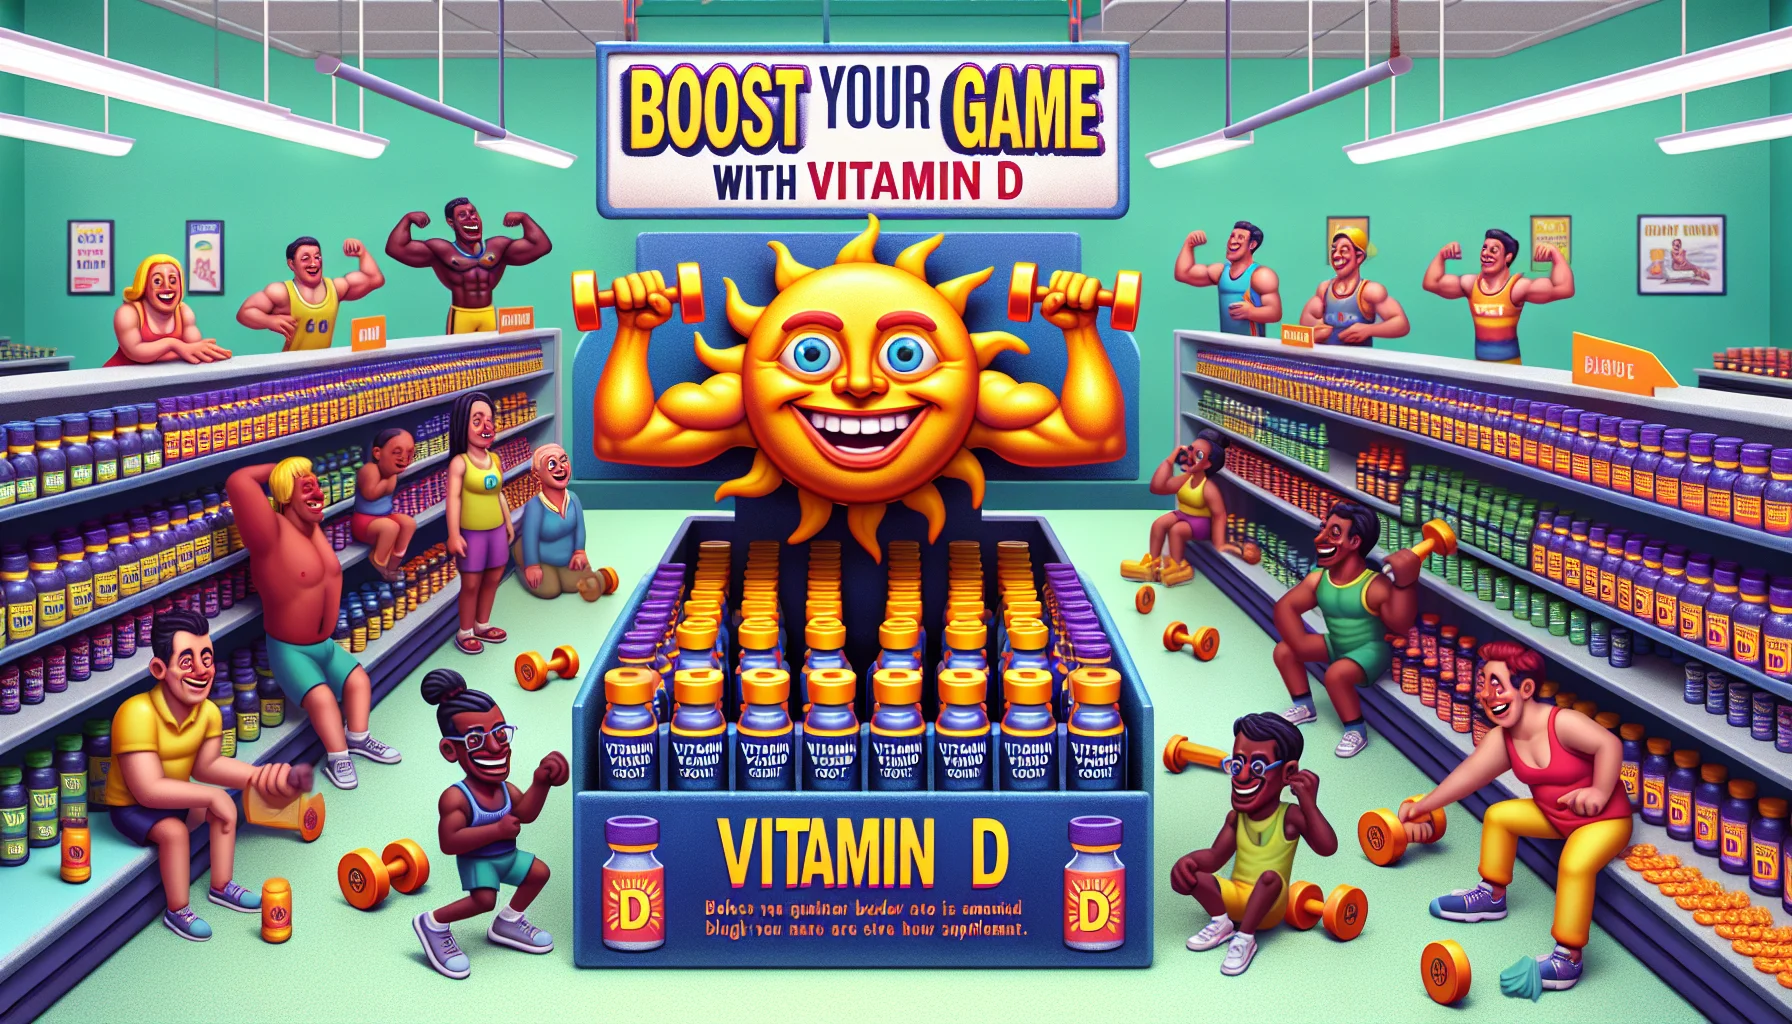 Create a vibrant image portraying an unusual and humorous scenario in a local health store. At the center of the scene stands an aisle filled with vitamin D shots shaped like tiny dumbbells. Adjacent to it is a signboard with text 'Boost your game with vitamin D'. A cartoon image of a sun grinning broadly and flexing its 'muscles', mimicking a bodybuilder, is on the top. Around the store, racially diverse male and female athletes of various ages are chuckling at the playful display and are enthused about buying the supplements. 